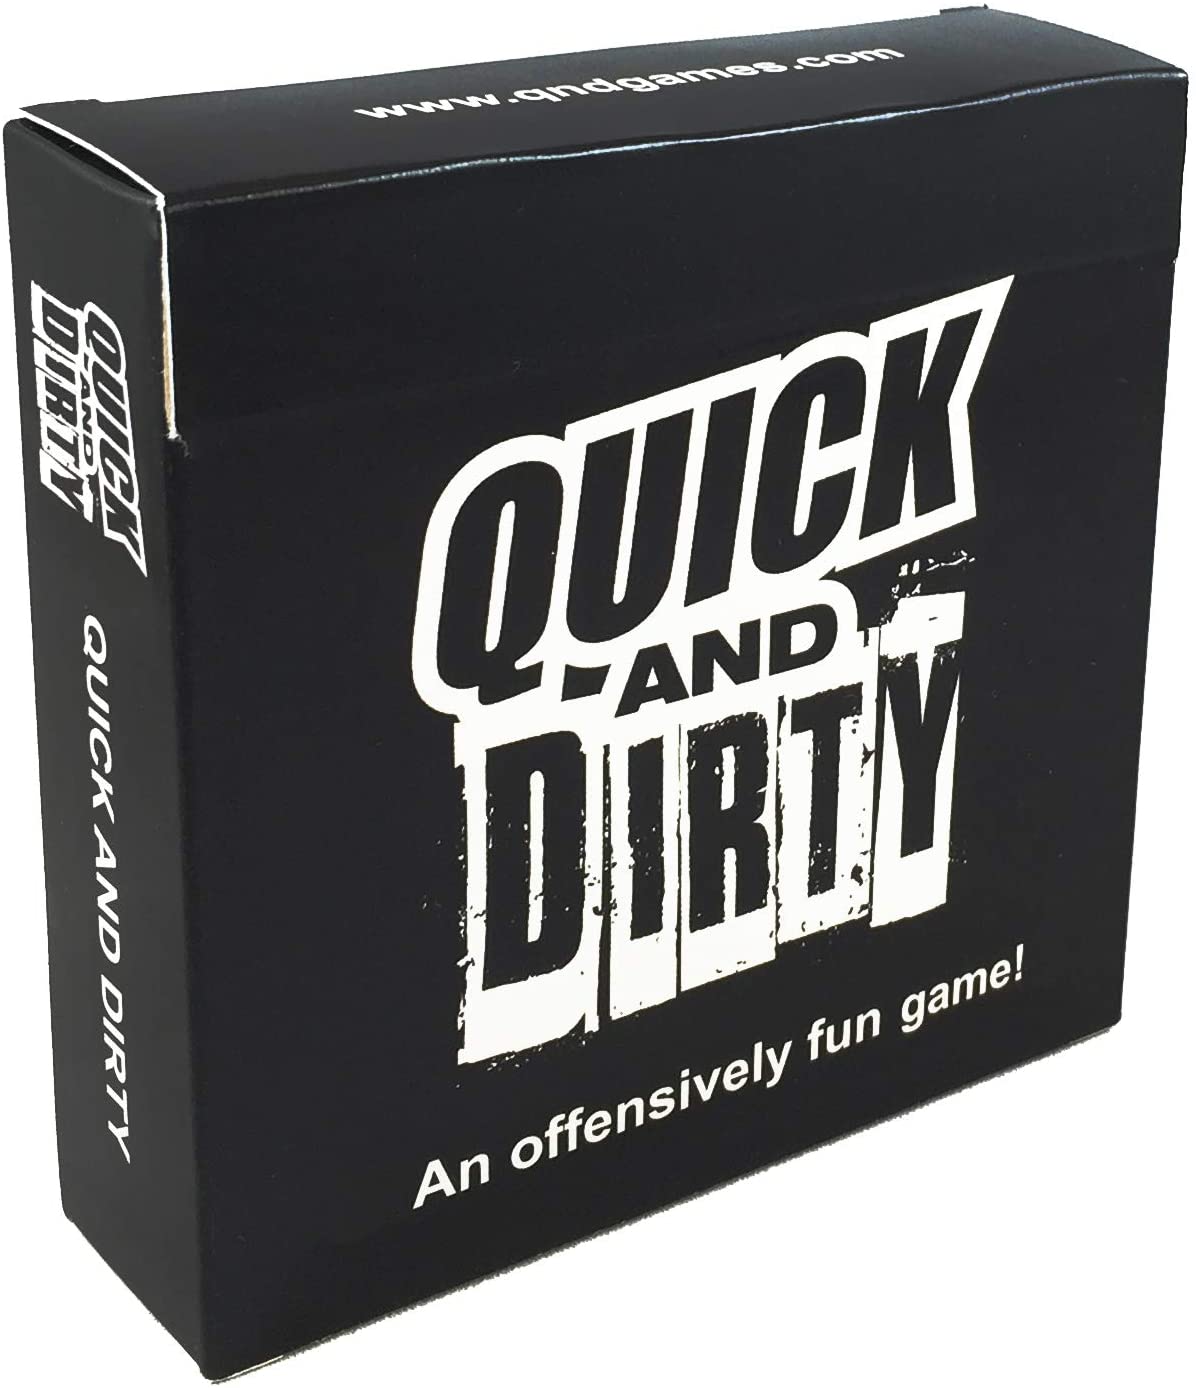 Quick And Dirty - an Offensively Fun Game!